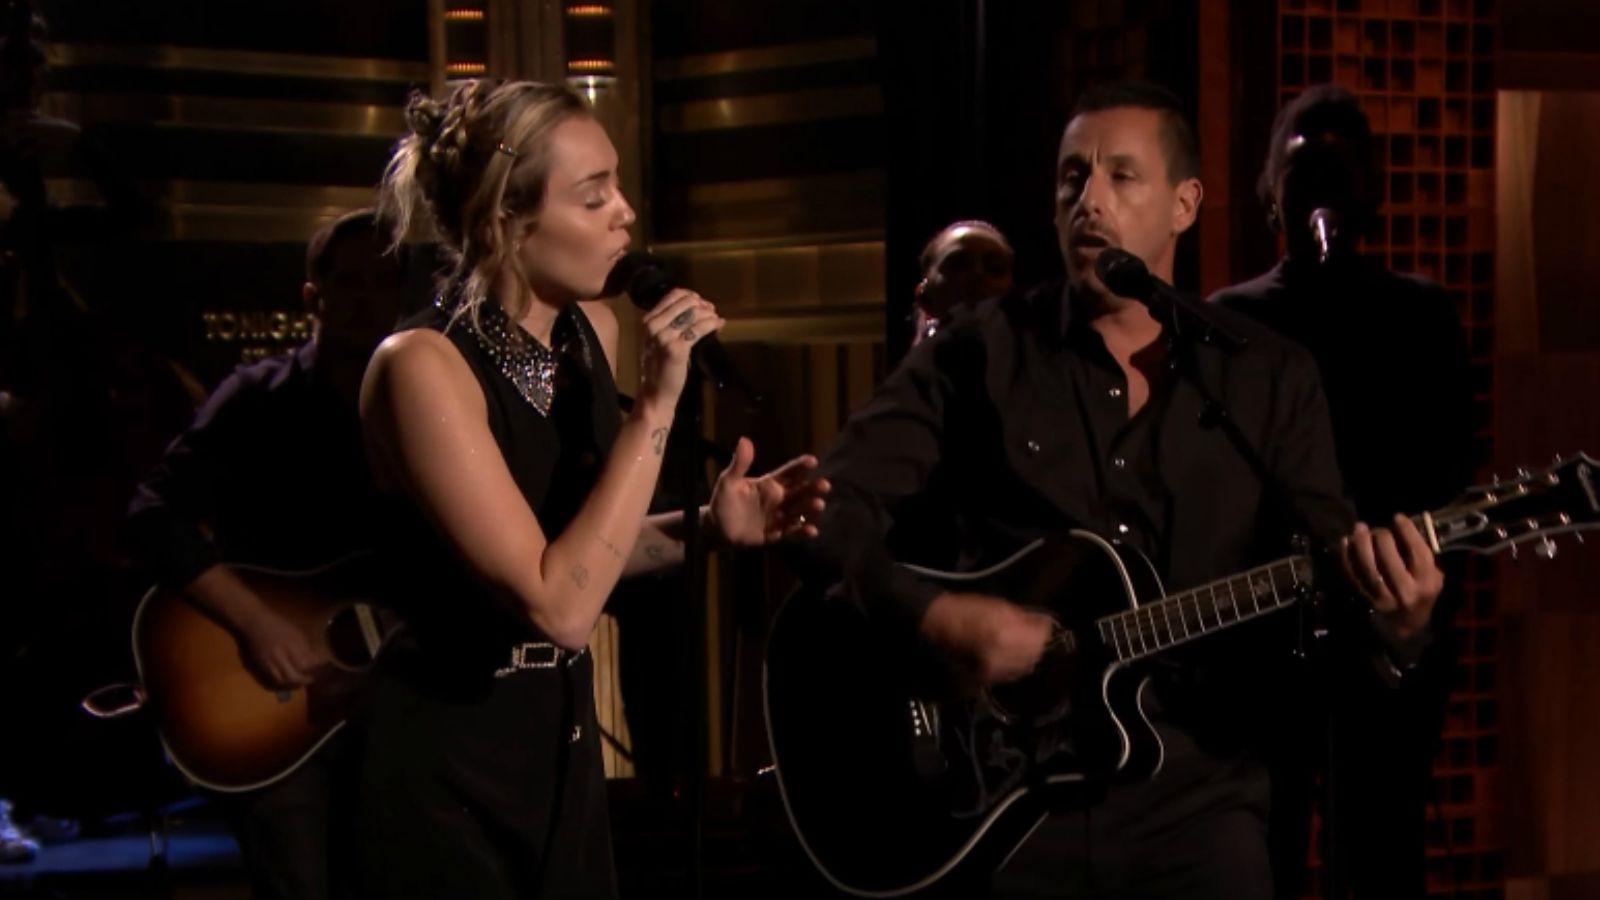 Miley Cyrus and Adam Sandler Perform a Moving Cover of Dido’s “No Freedom”